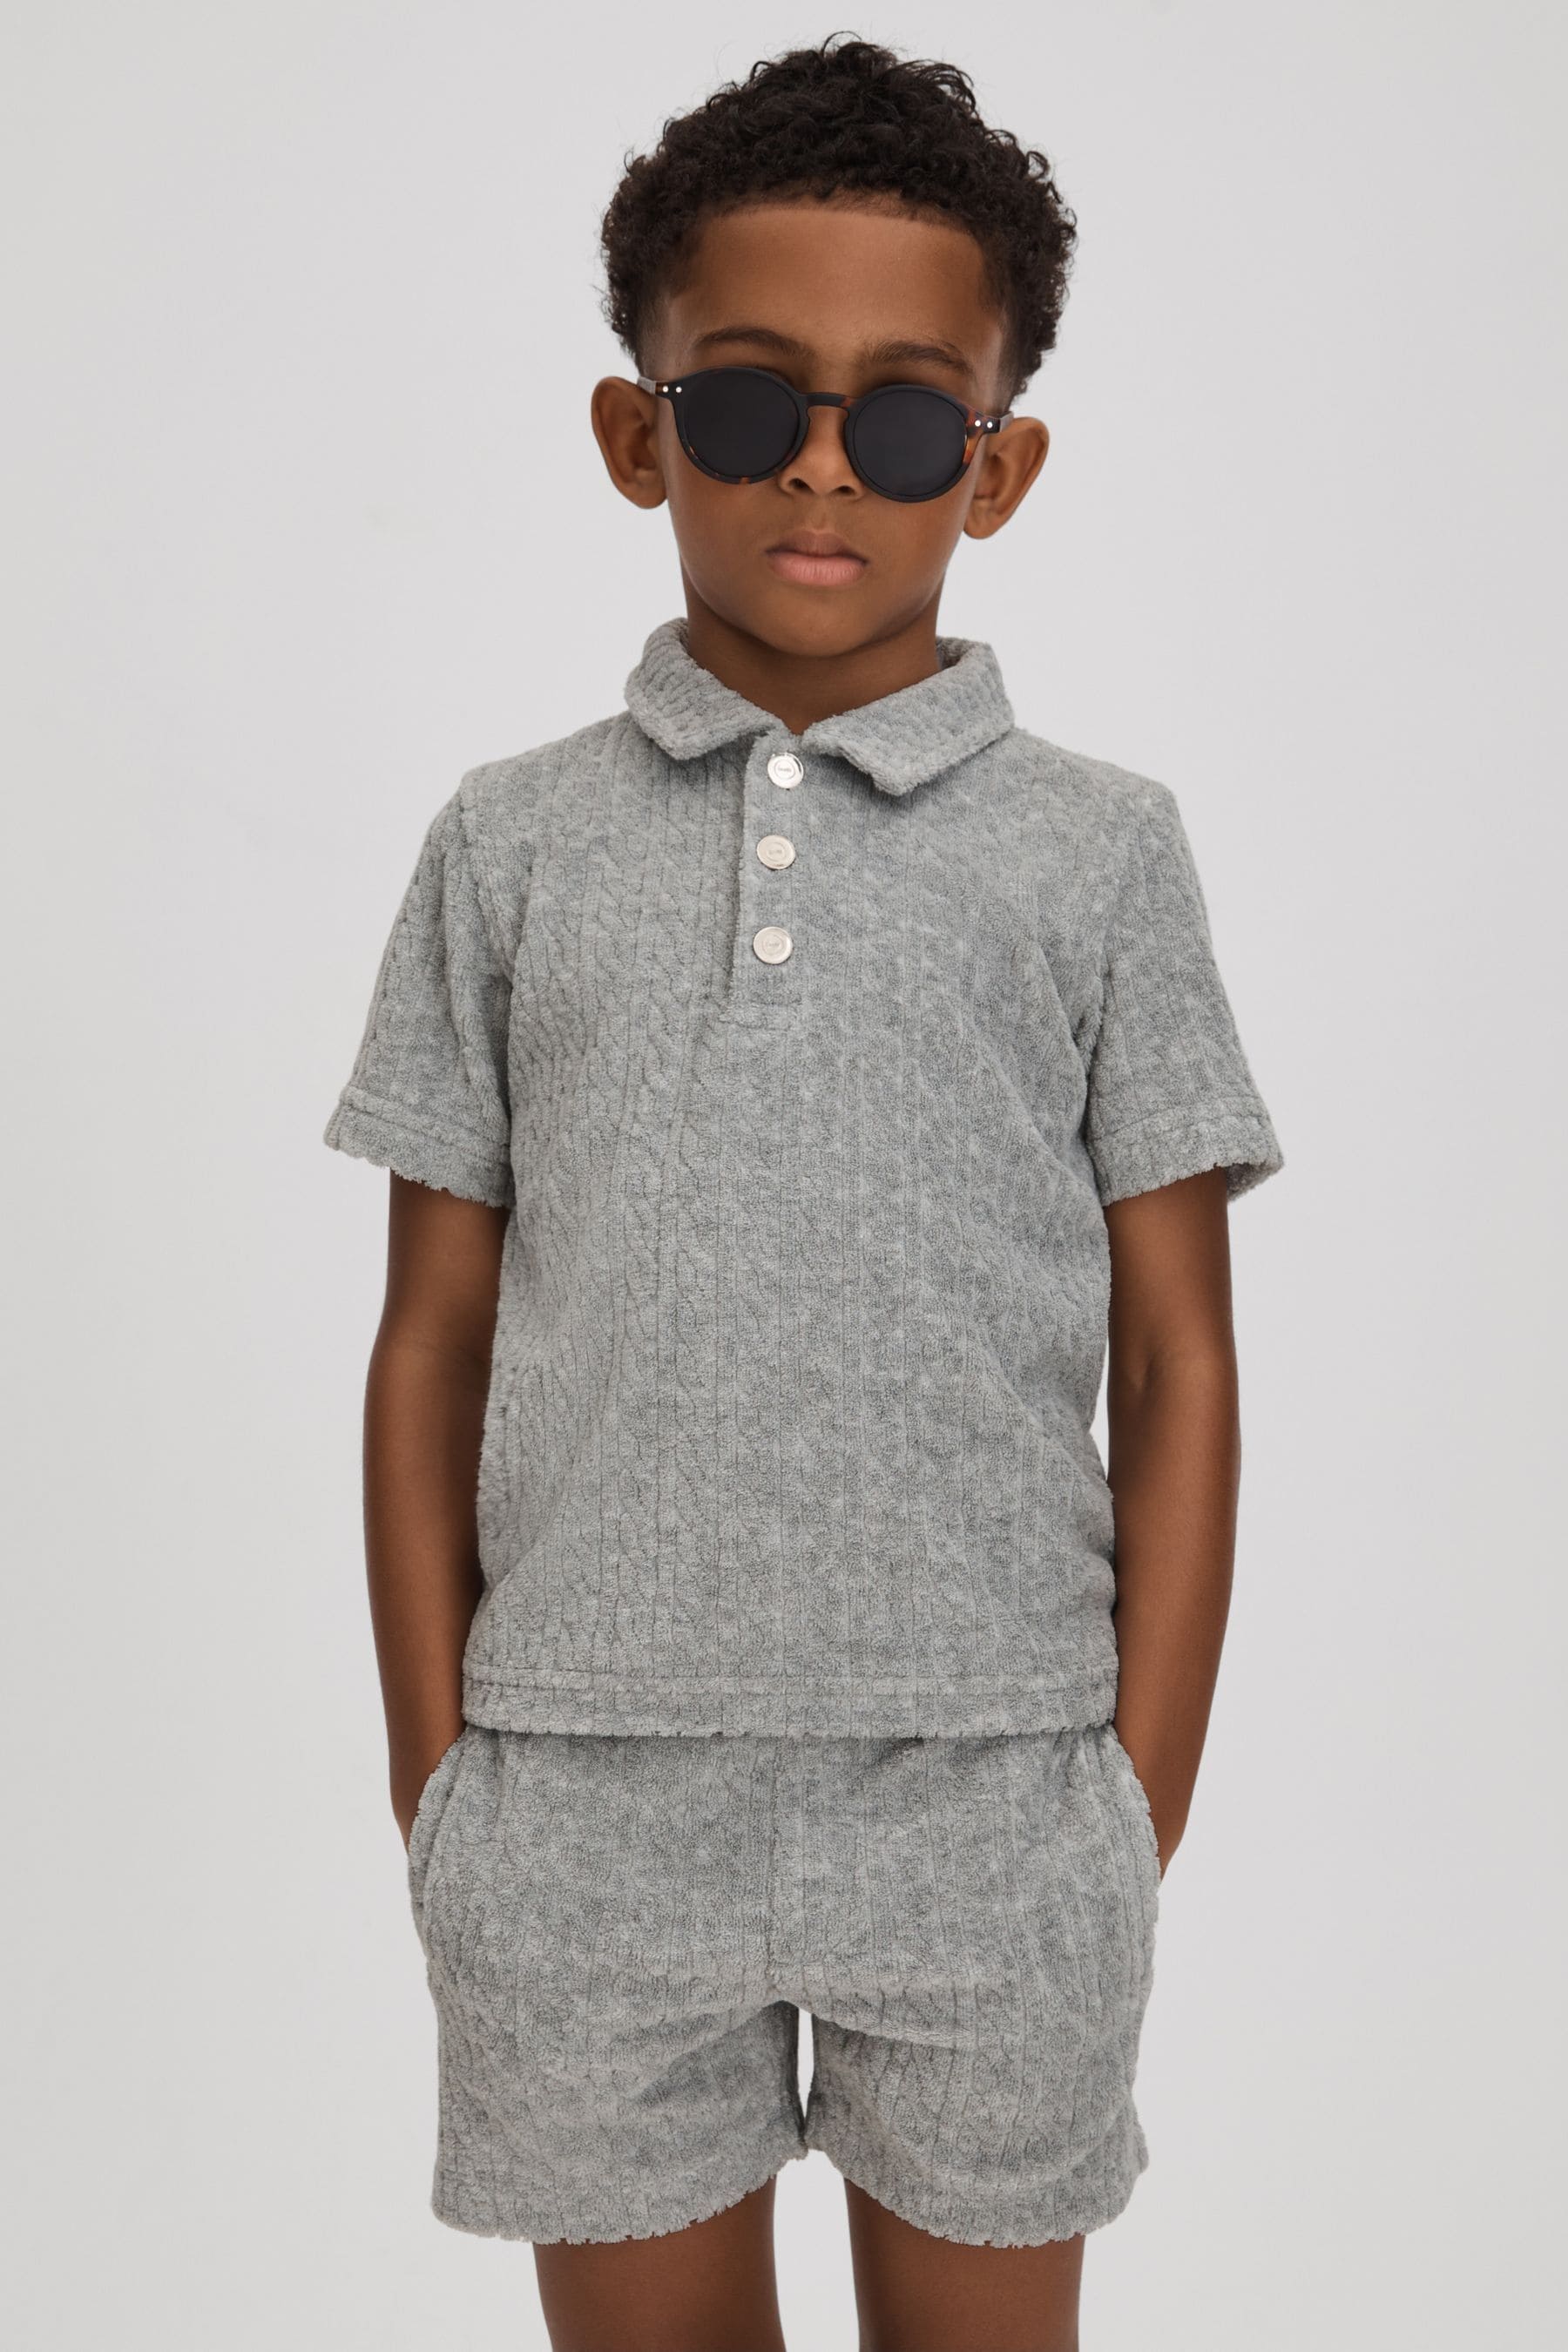 Reiss Iggy - Soft Grey Towelling Polo Shirt, Age 4-5 Years